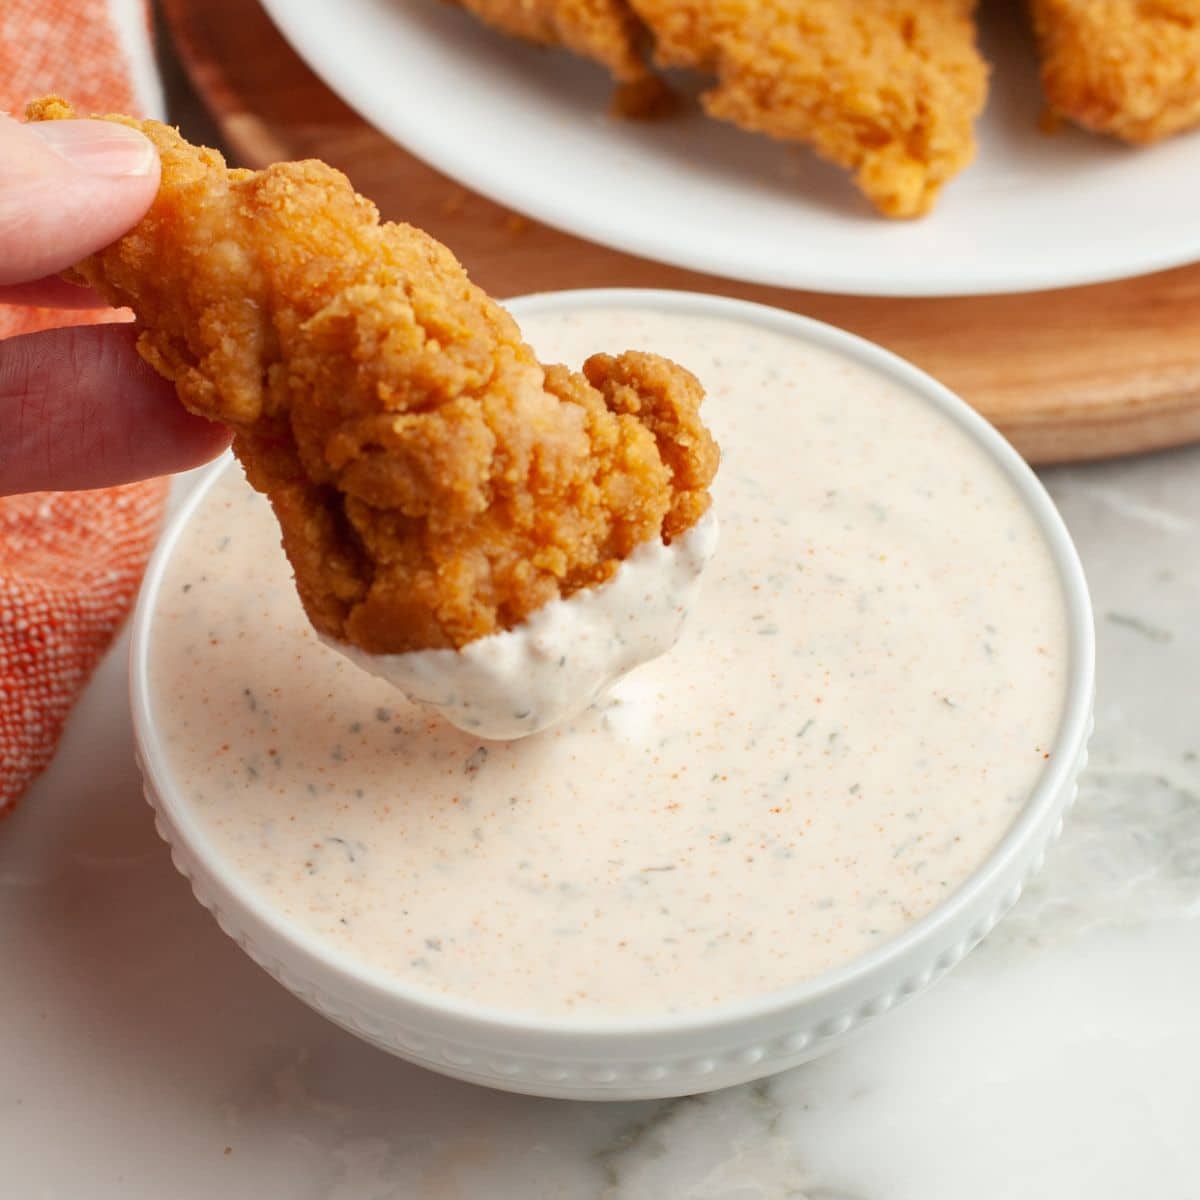 Bowl of sauce with chicken tender.